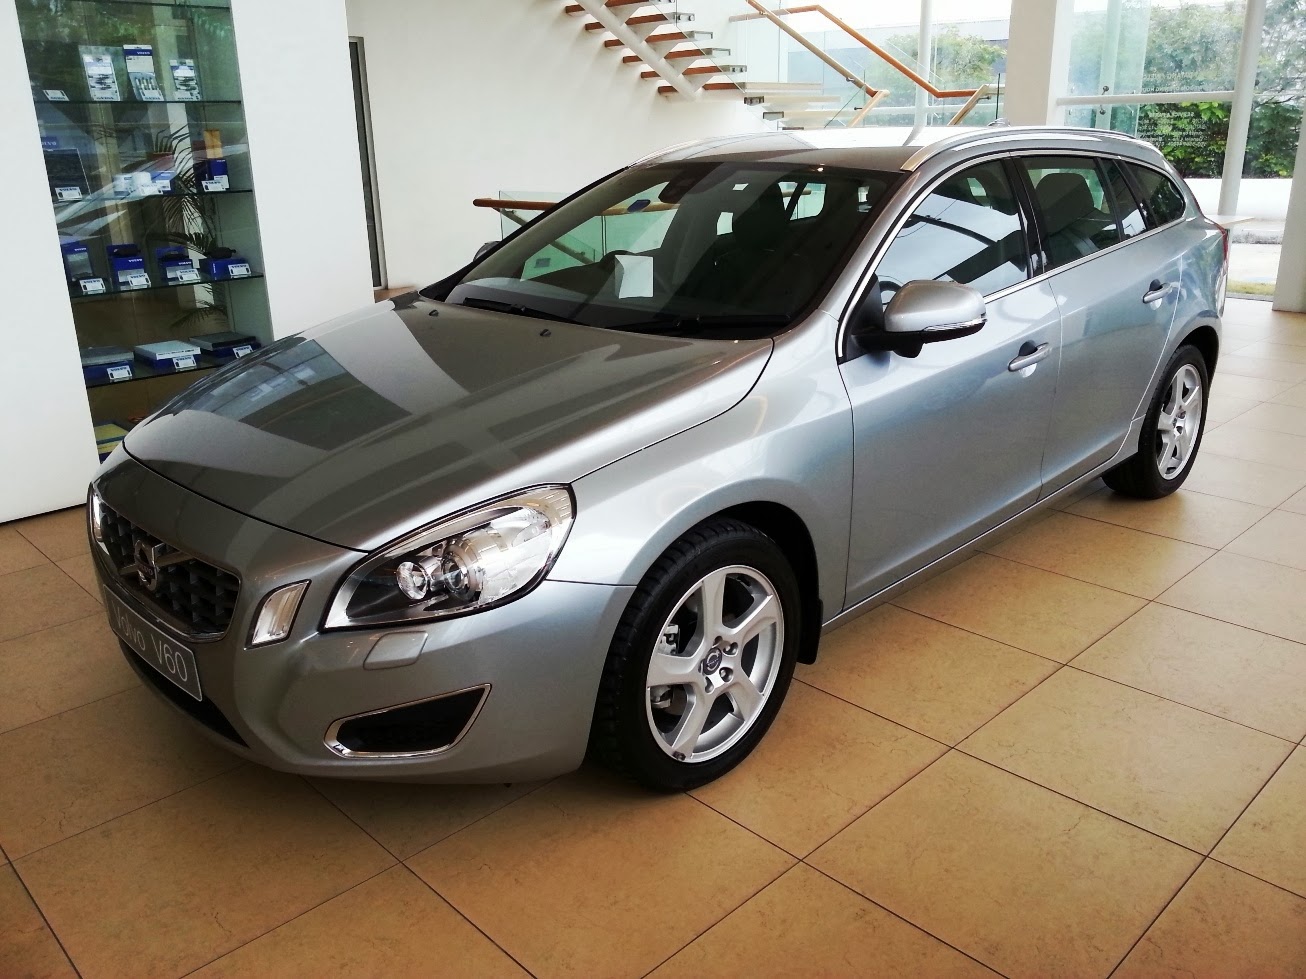 ASIAN AUTO DIGEST: The New Volvo V40 launched in Malaysia Review – From